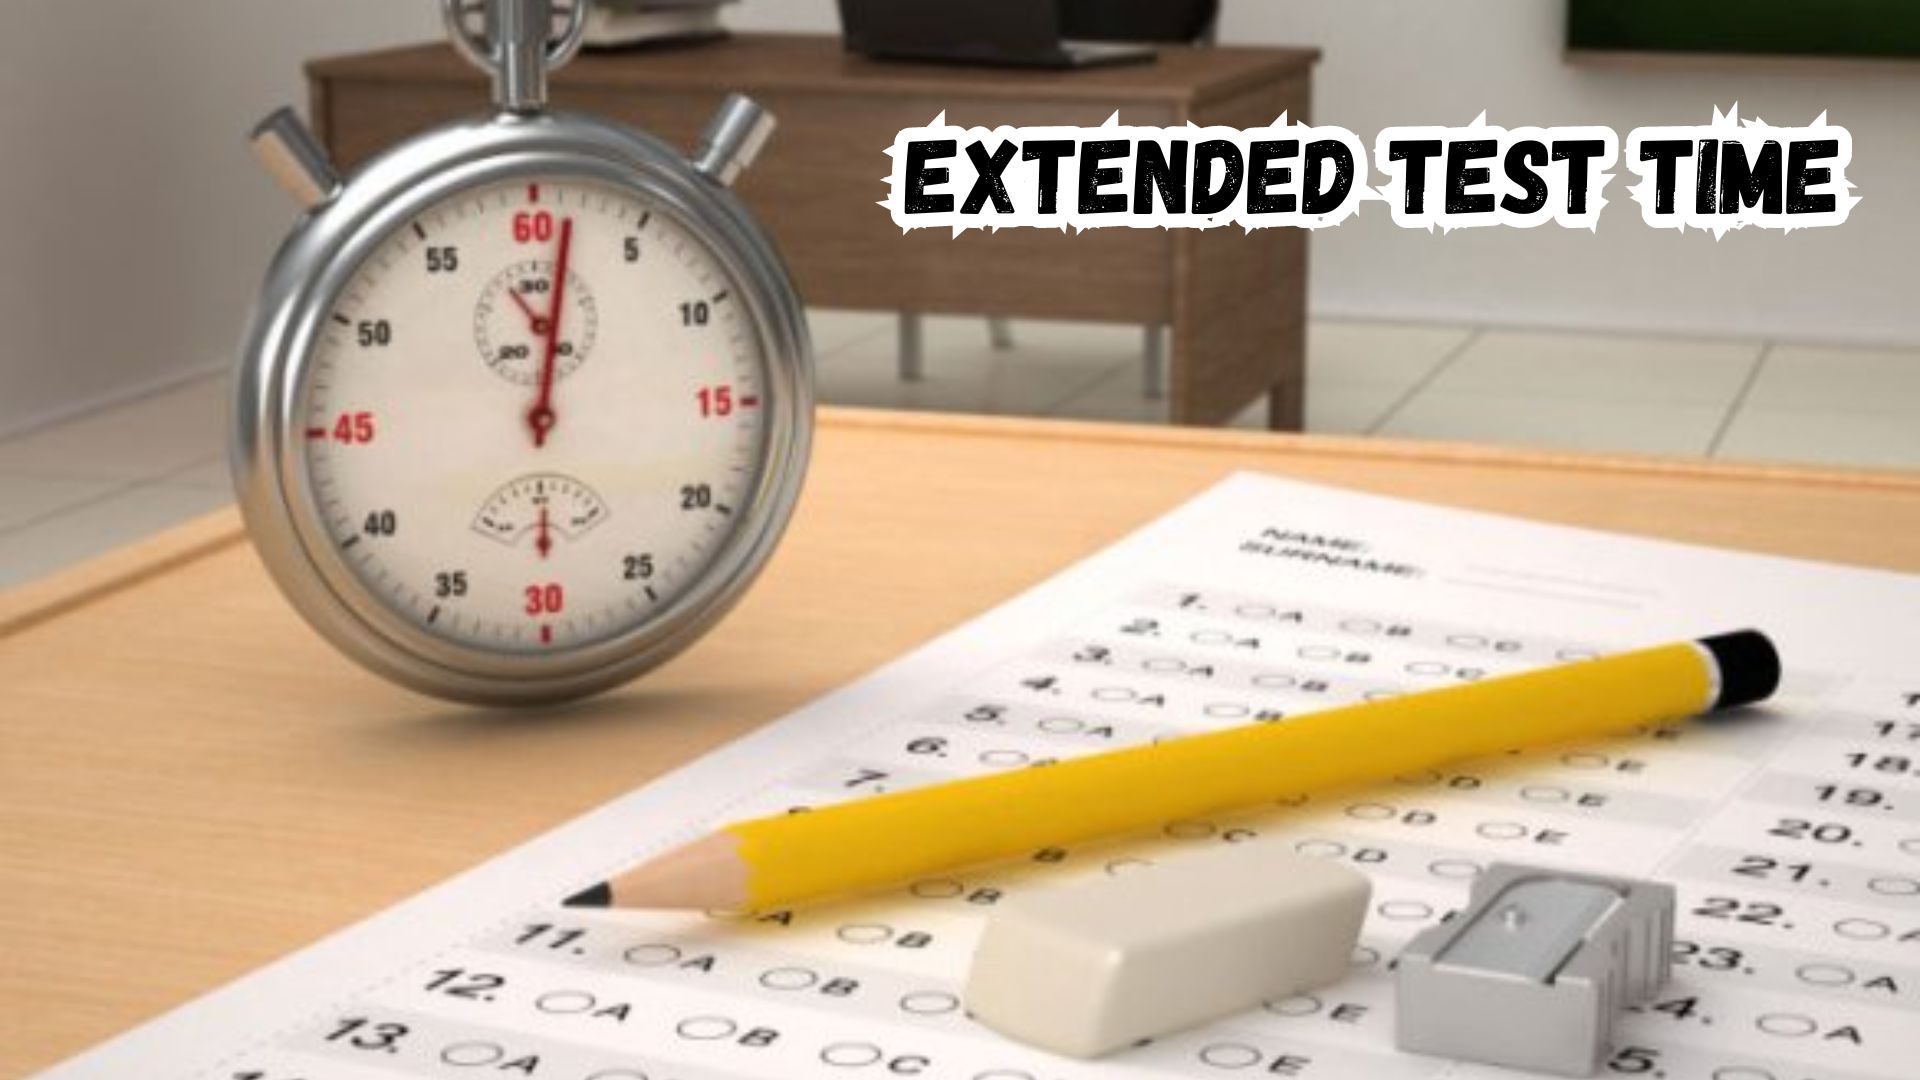 Extended Test Time.